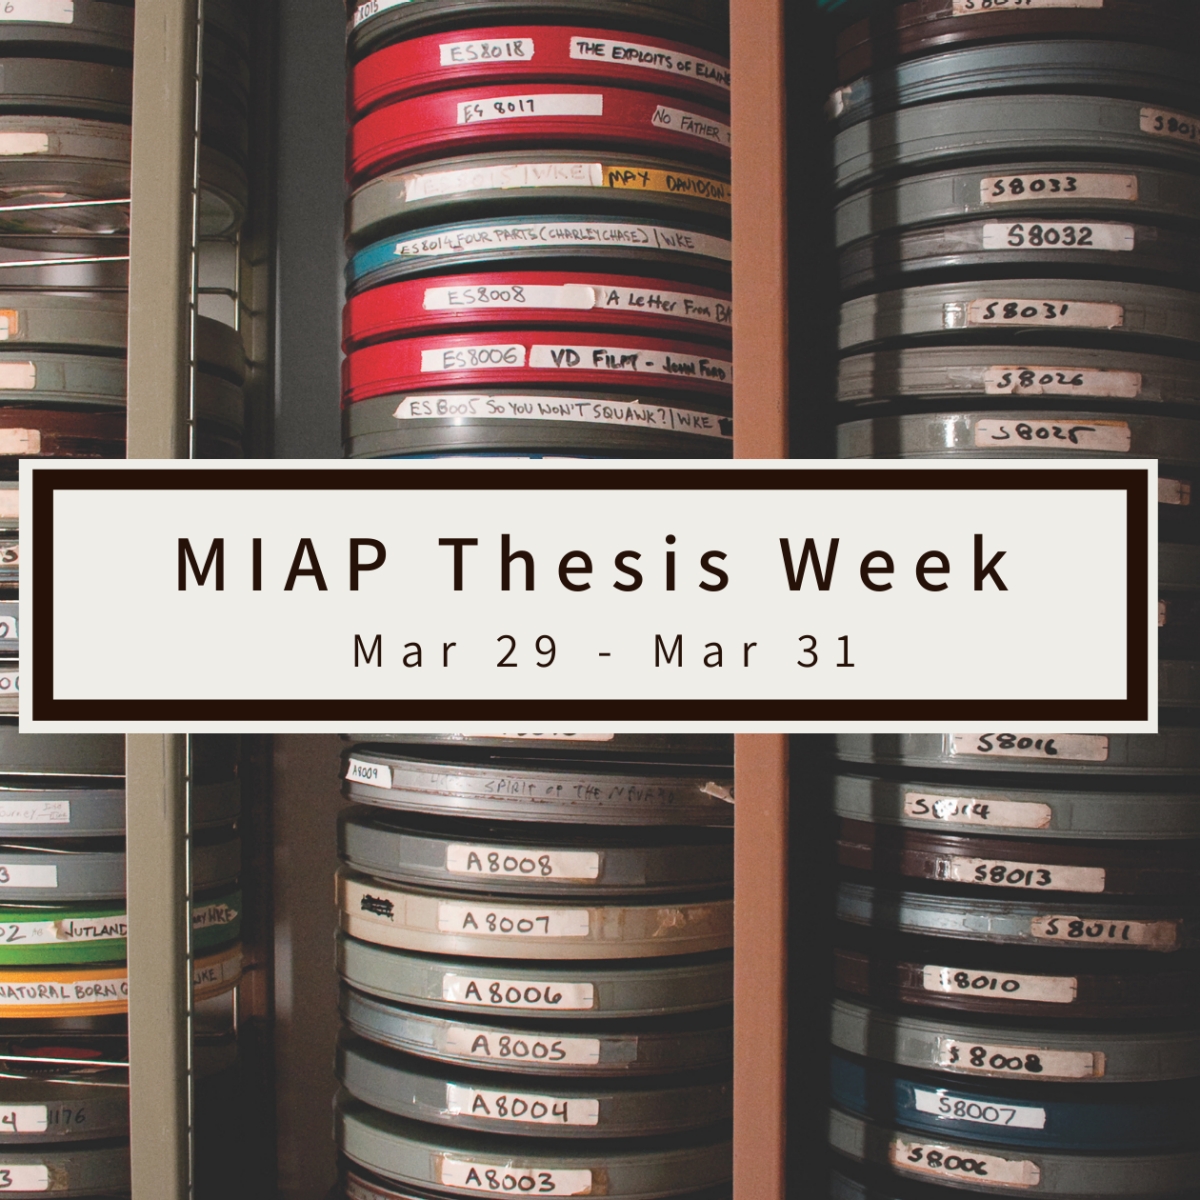 Moving Image Archiving and Preservation (MIAP) - 2022 Thesis Week